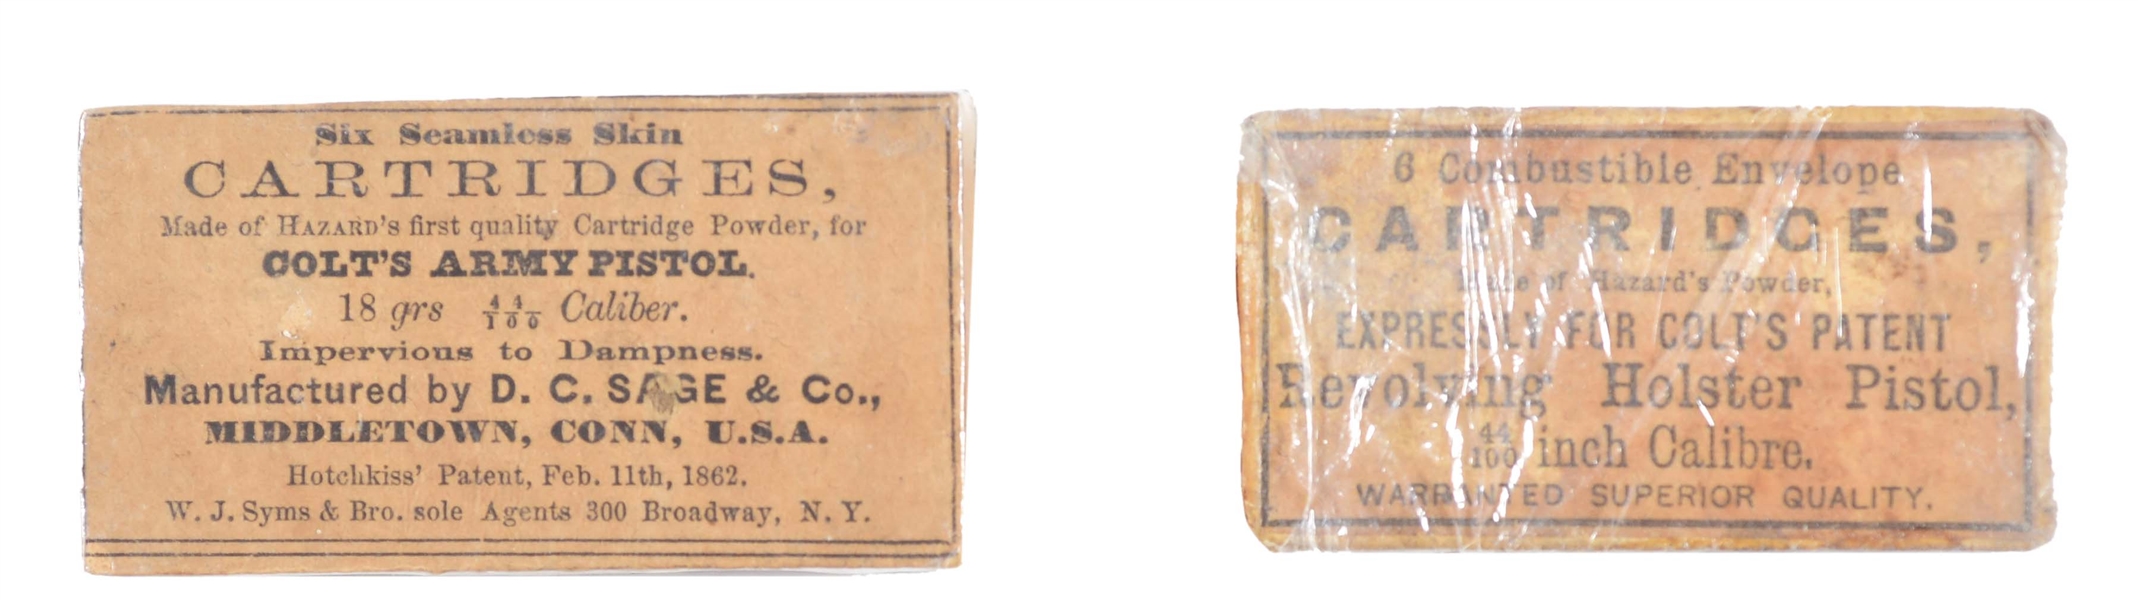 LOT OF 2: SAGE & CO. AND HAZARDS POWDER .44 COLT ARMY REVOLVER CARTRIDGE SKINS